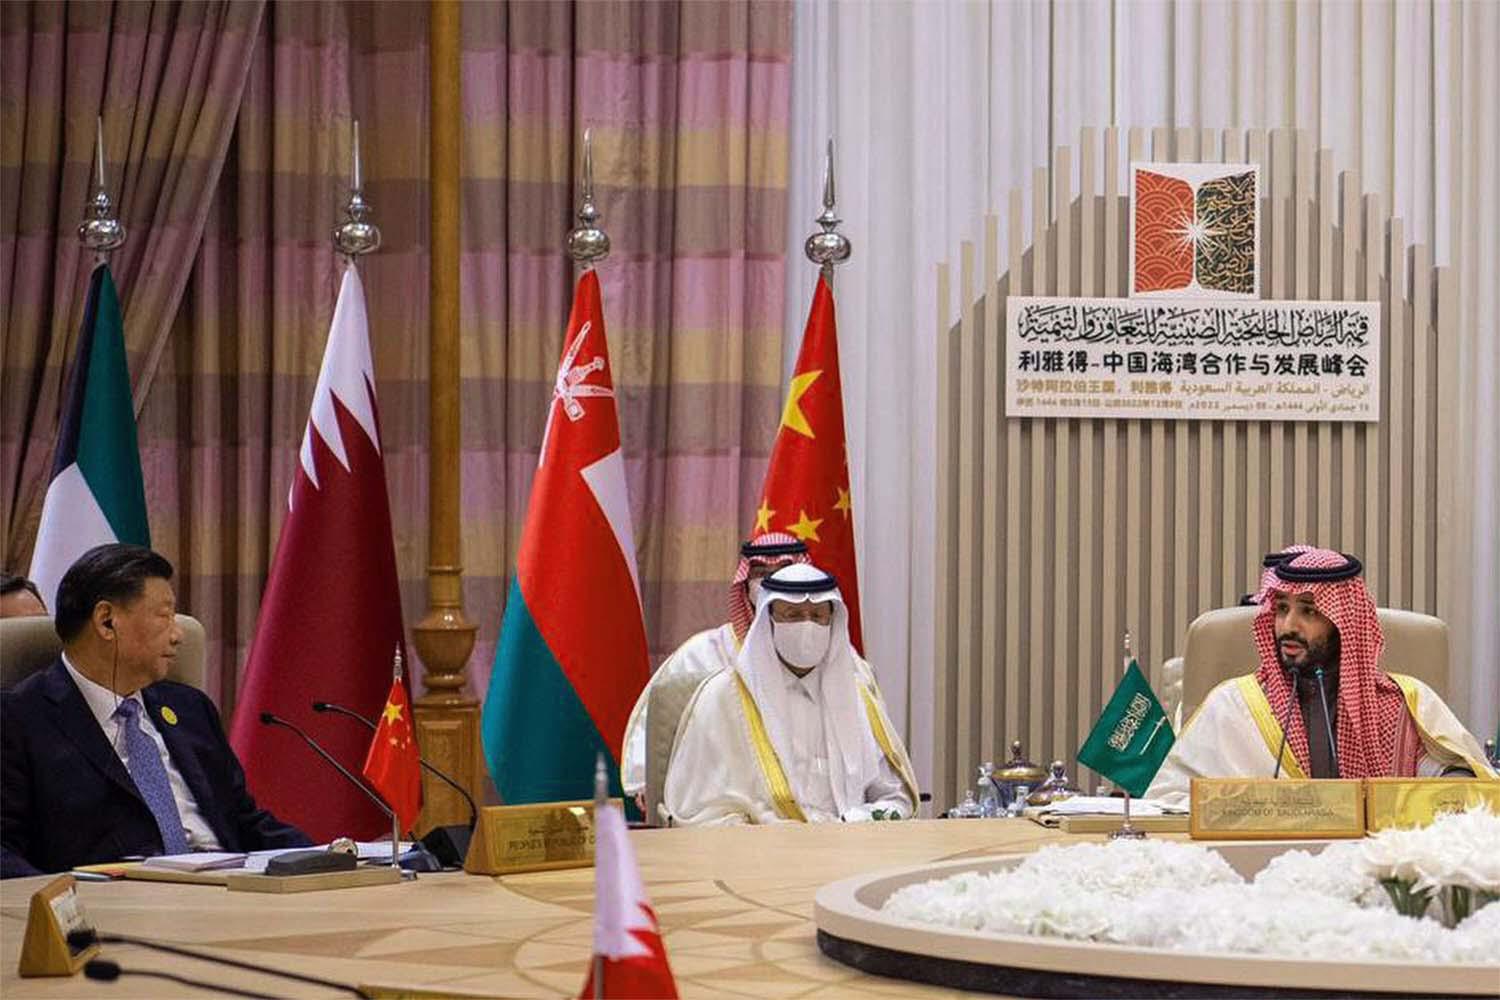 Xi says China will also establish bilateral investment and economic cooperation working mechanisms with GCC states